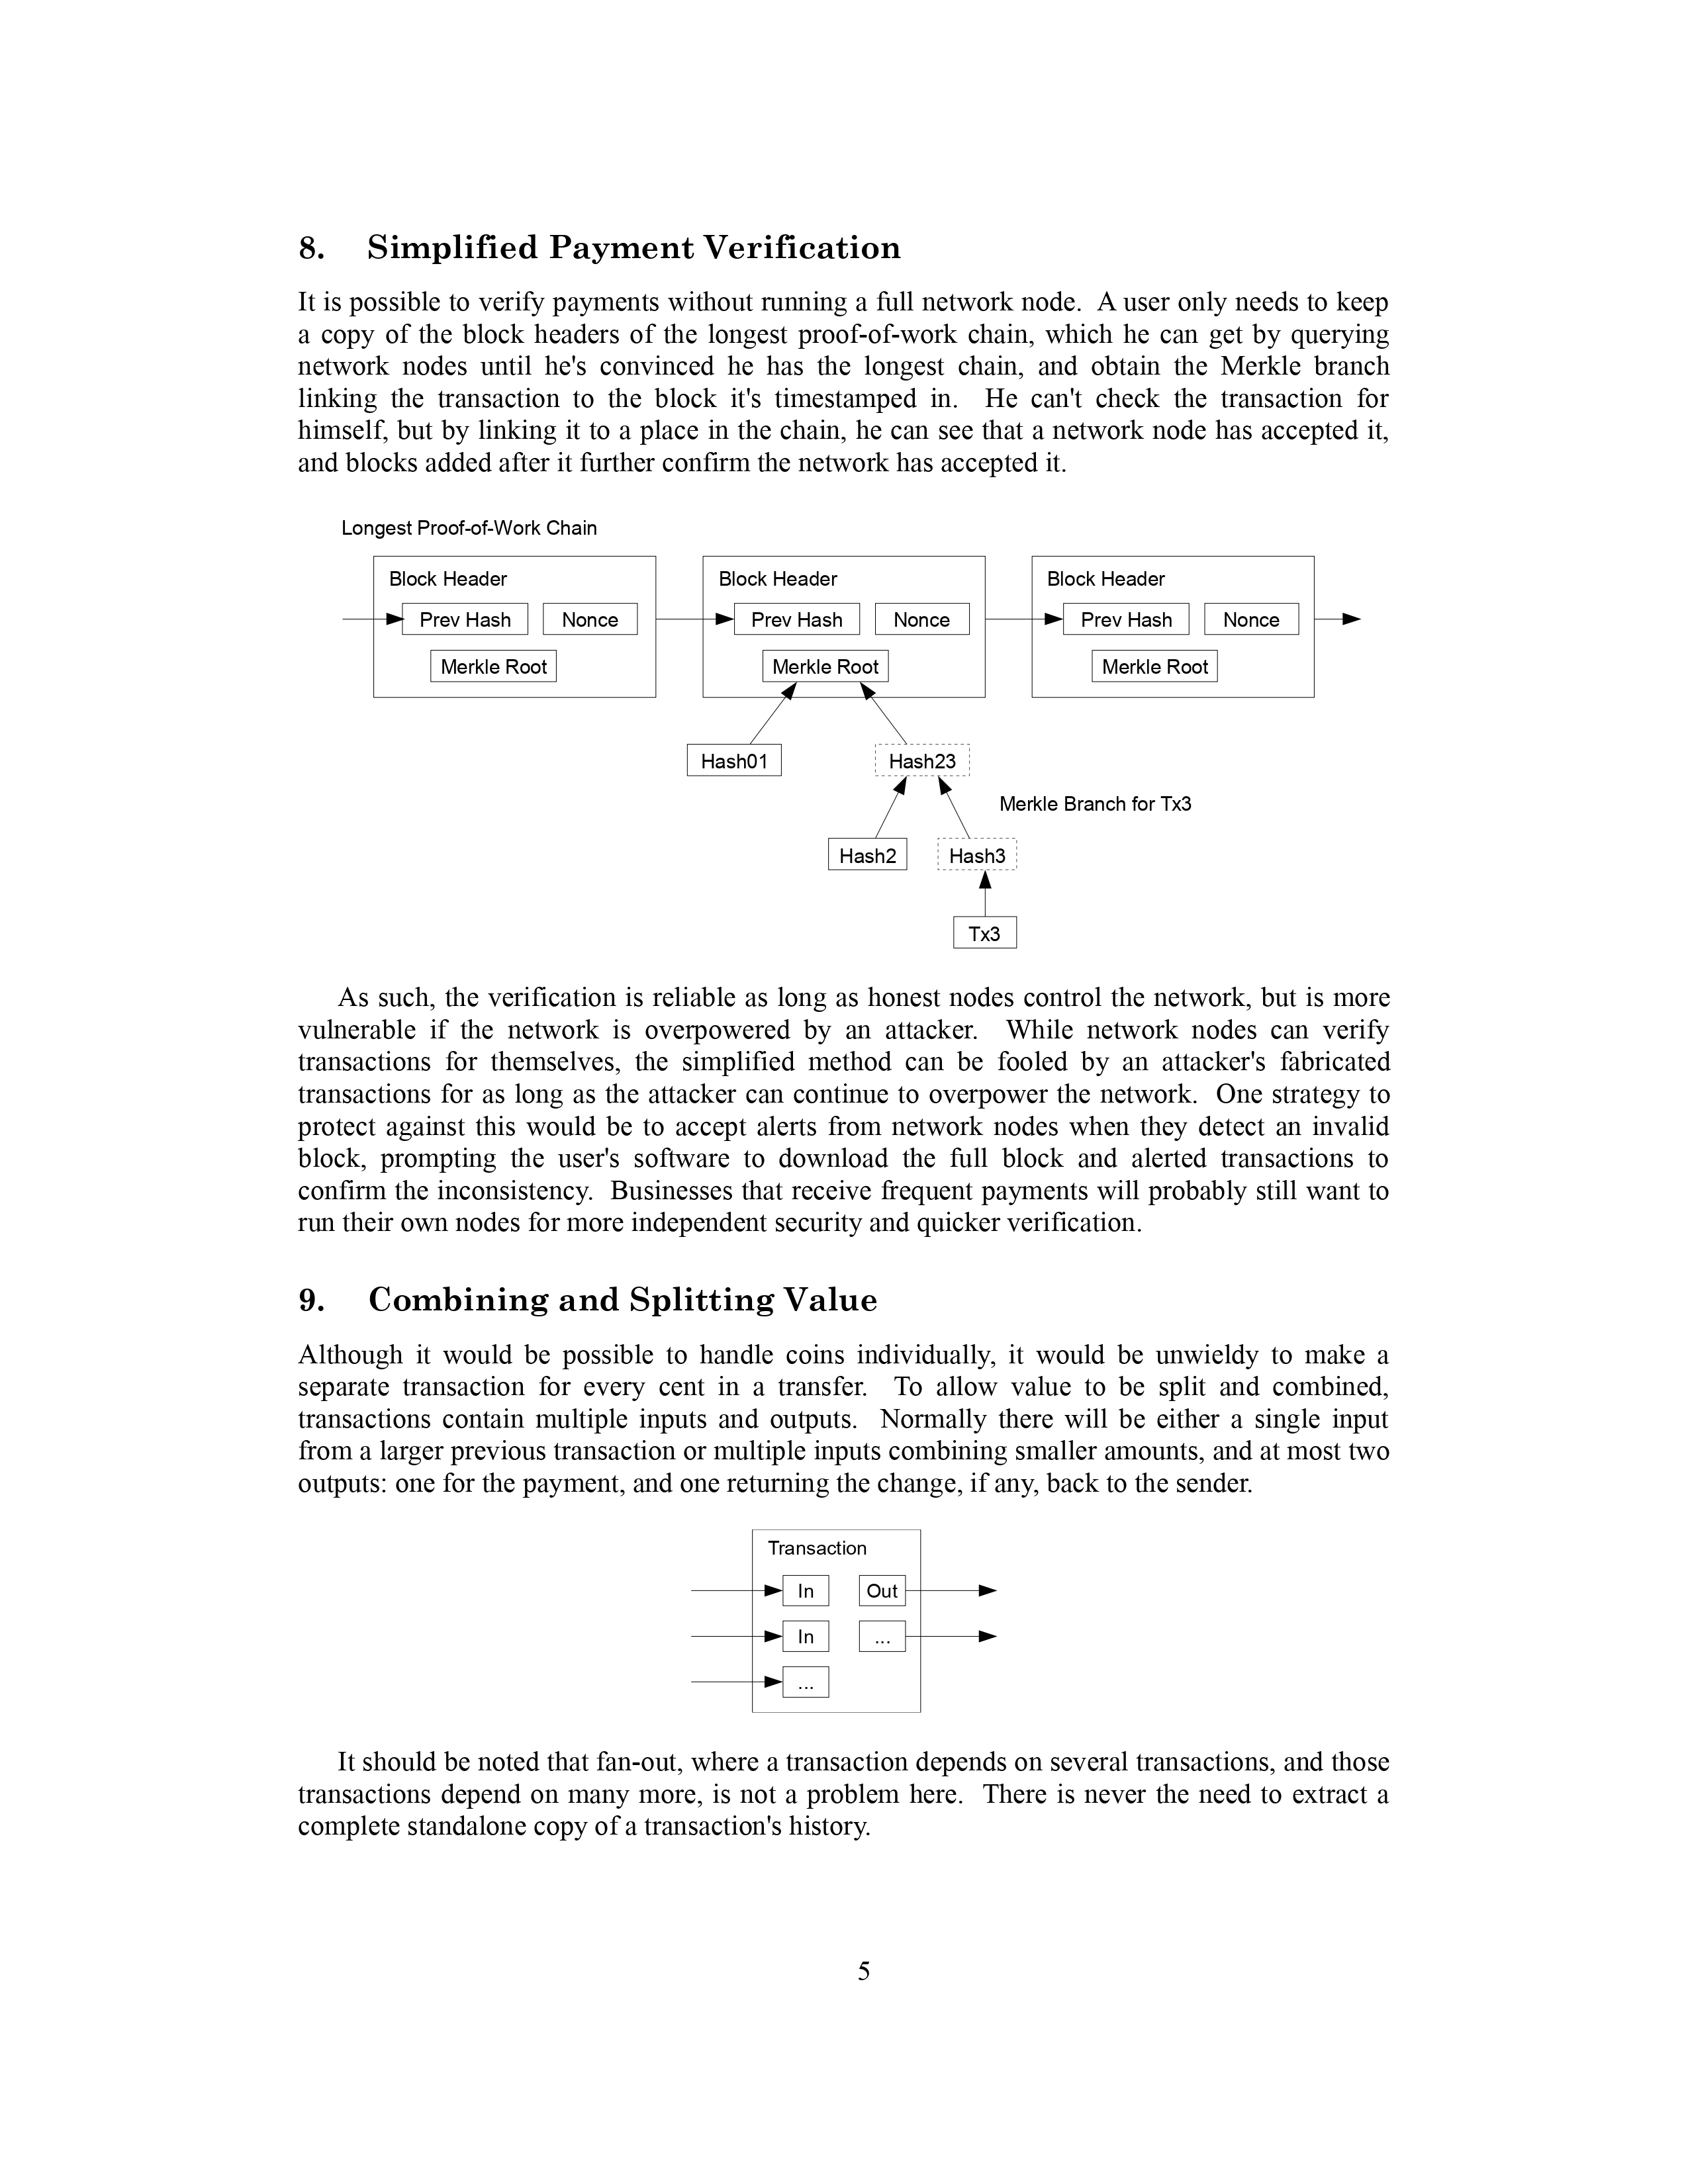 Bitcoin Whitepaper Page 5